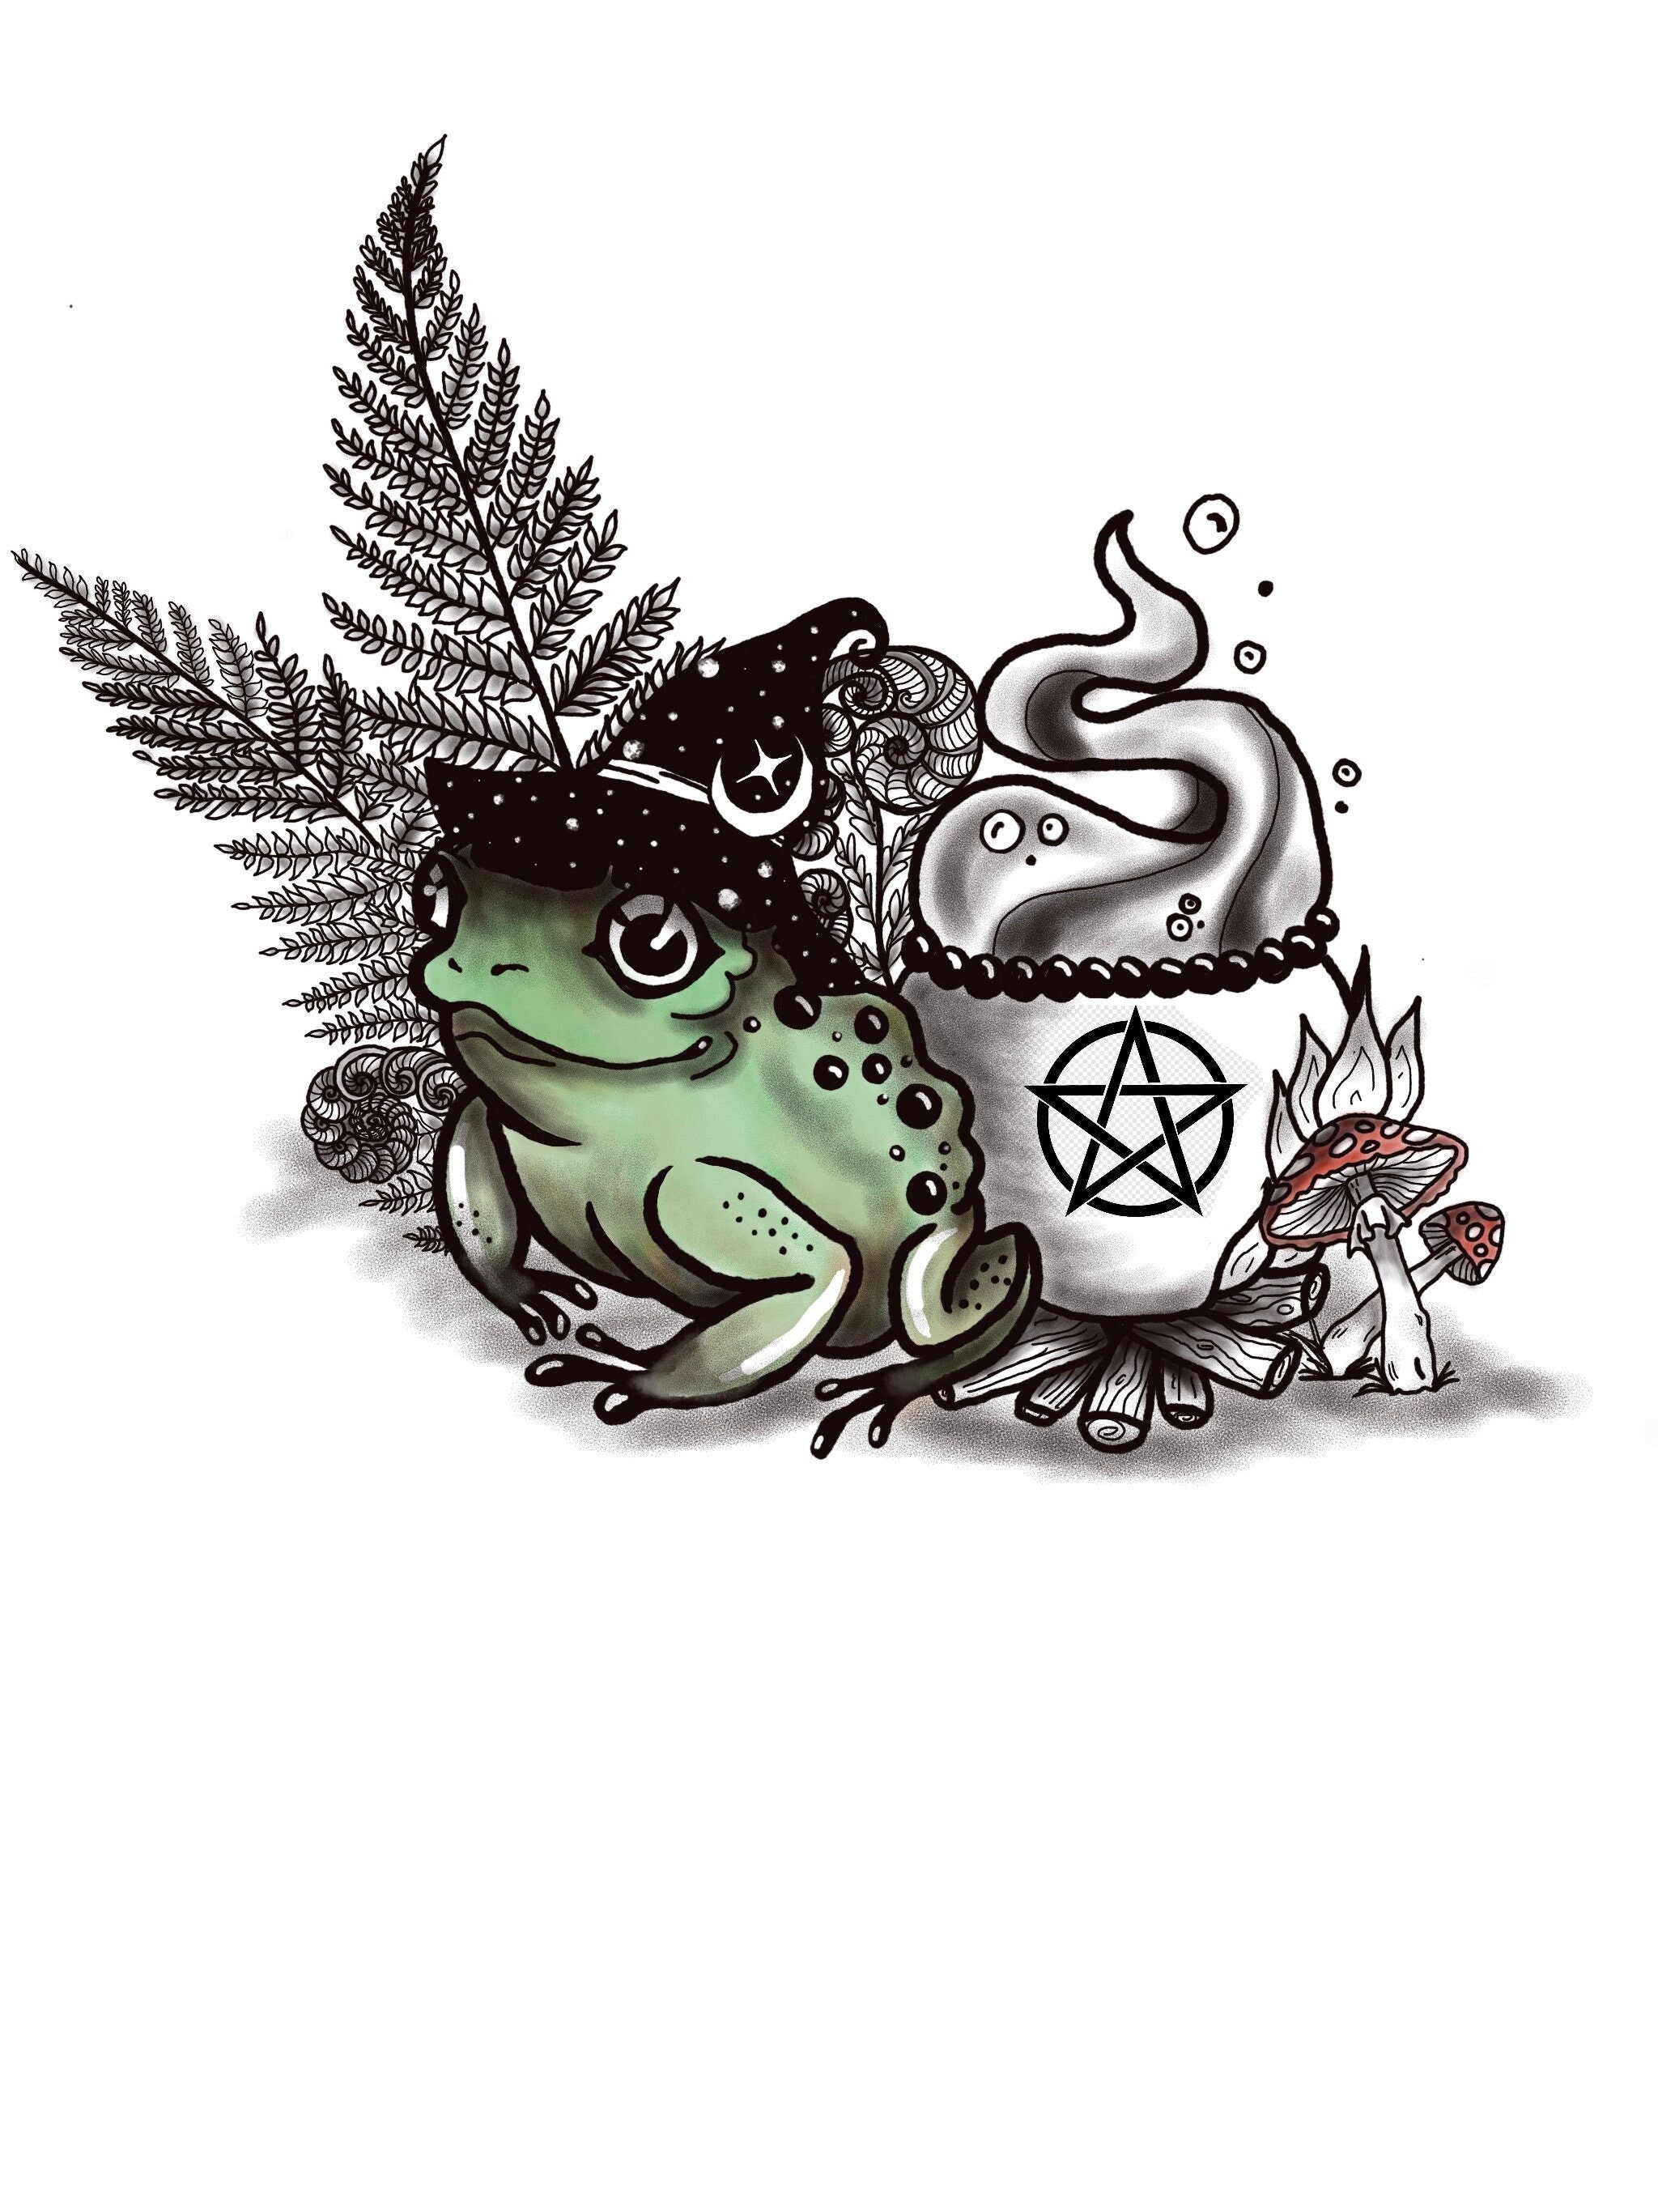 Frog smoking weed by UniqueTattoos on DeviantArt